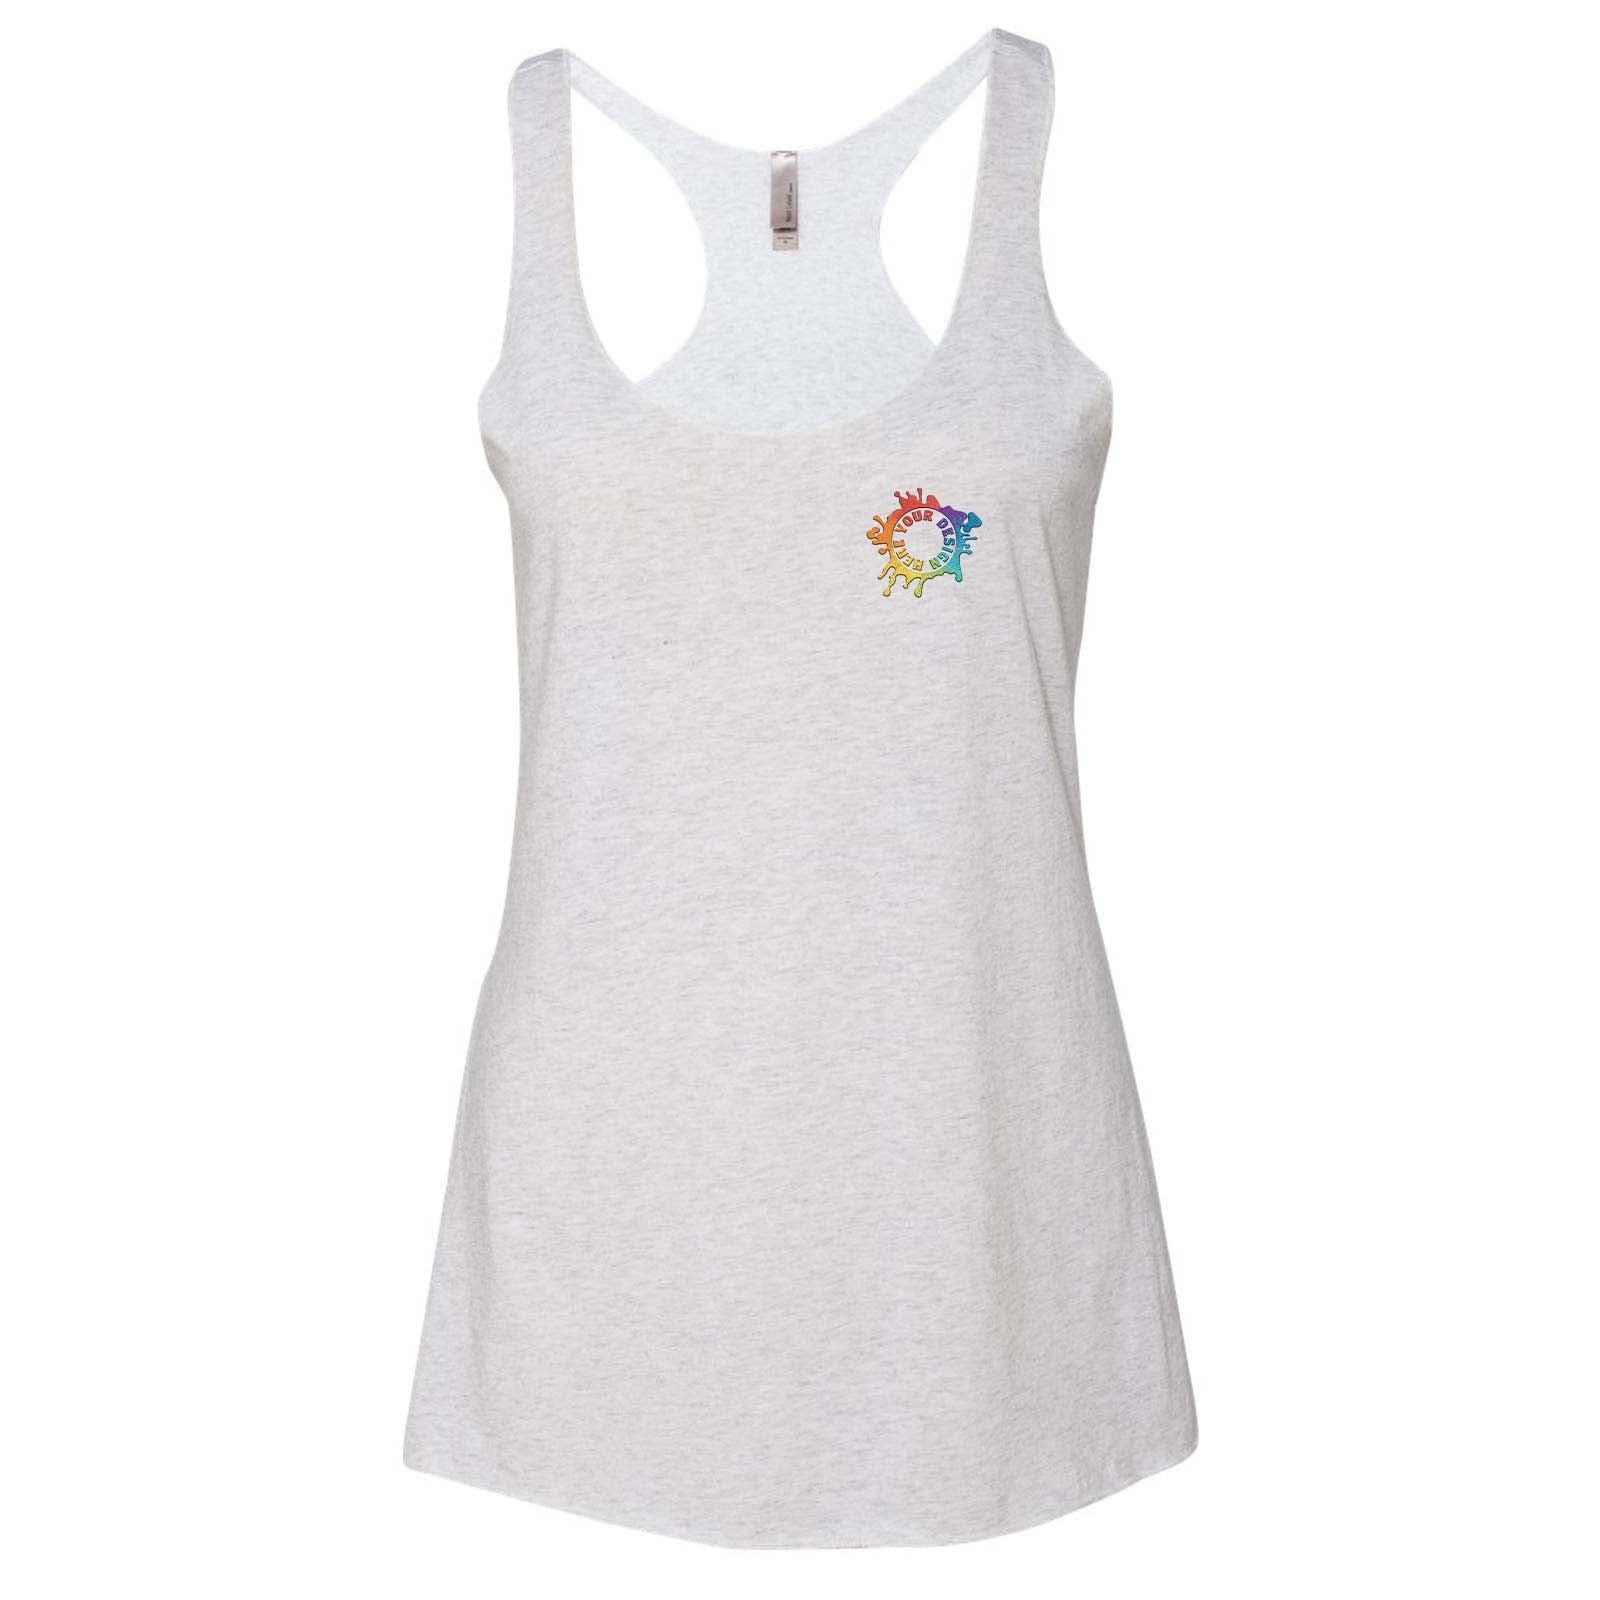 Next Level Women's Triblend Racerback Tank Top Embroidery - Mato & Hash